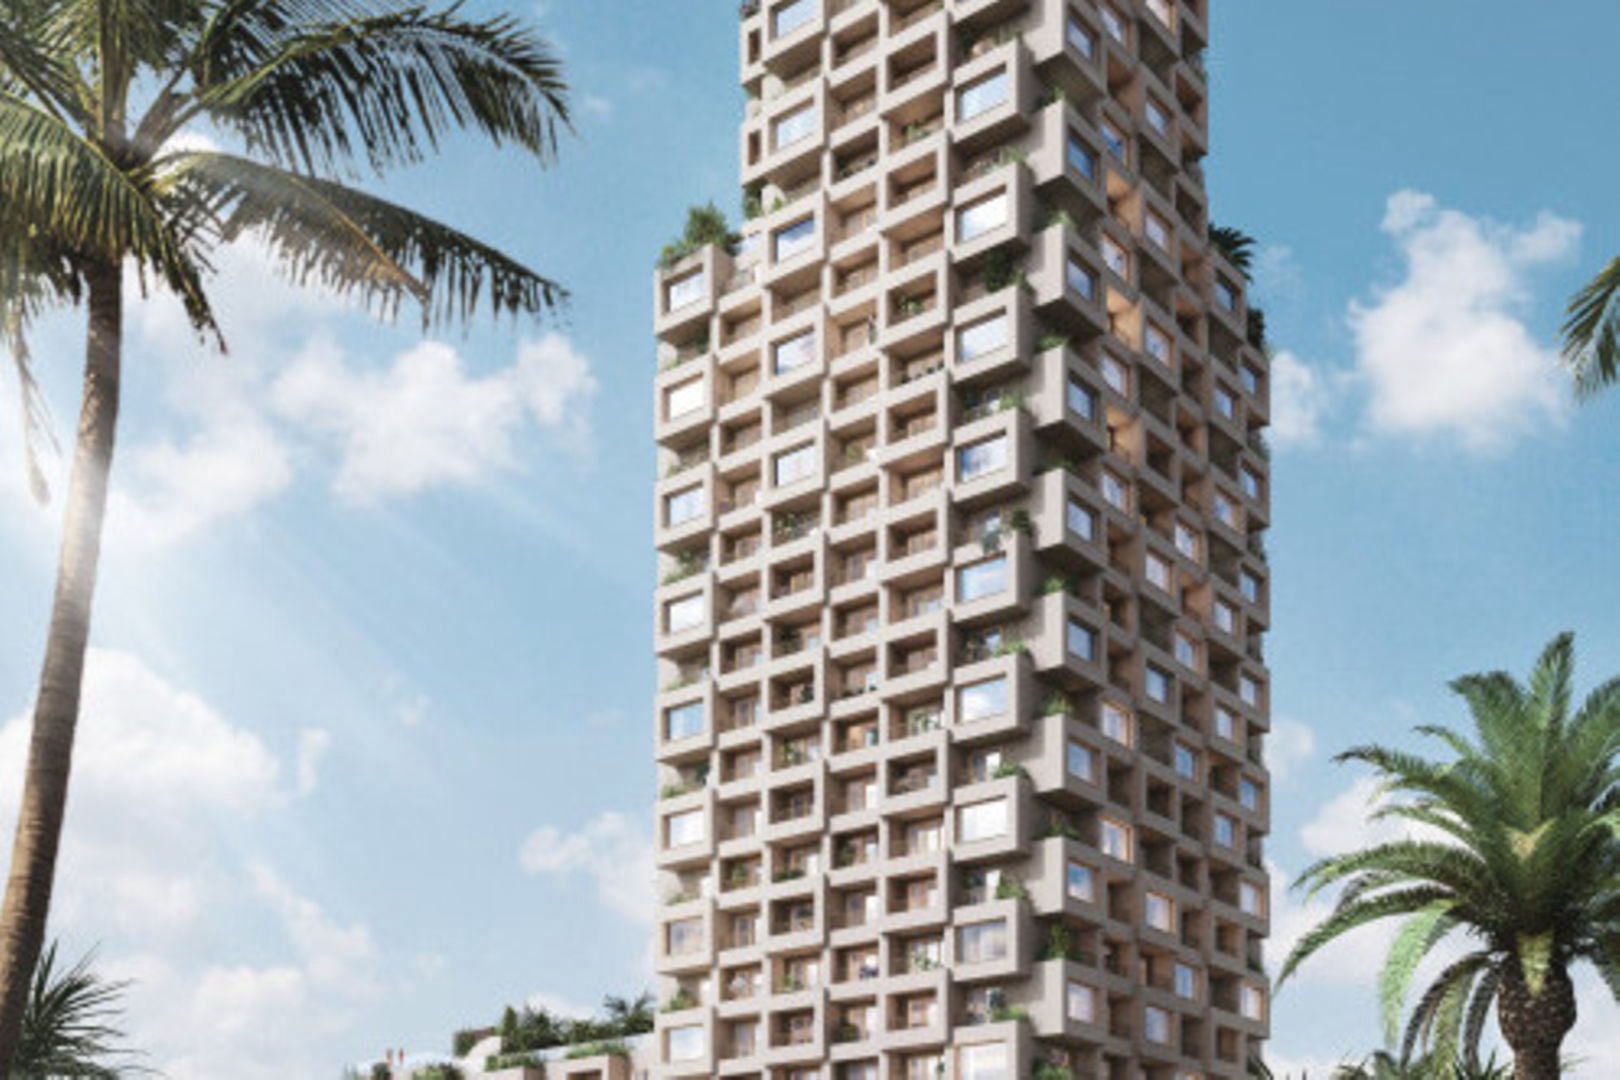 You are currently viewing Zanzibar to Erect Africa’s First Sustainable High-Rise Building – A Tower Made of Timber | The African Exponent.